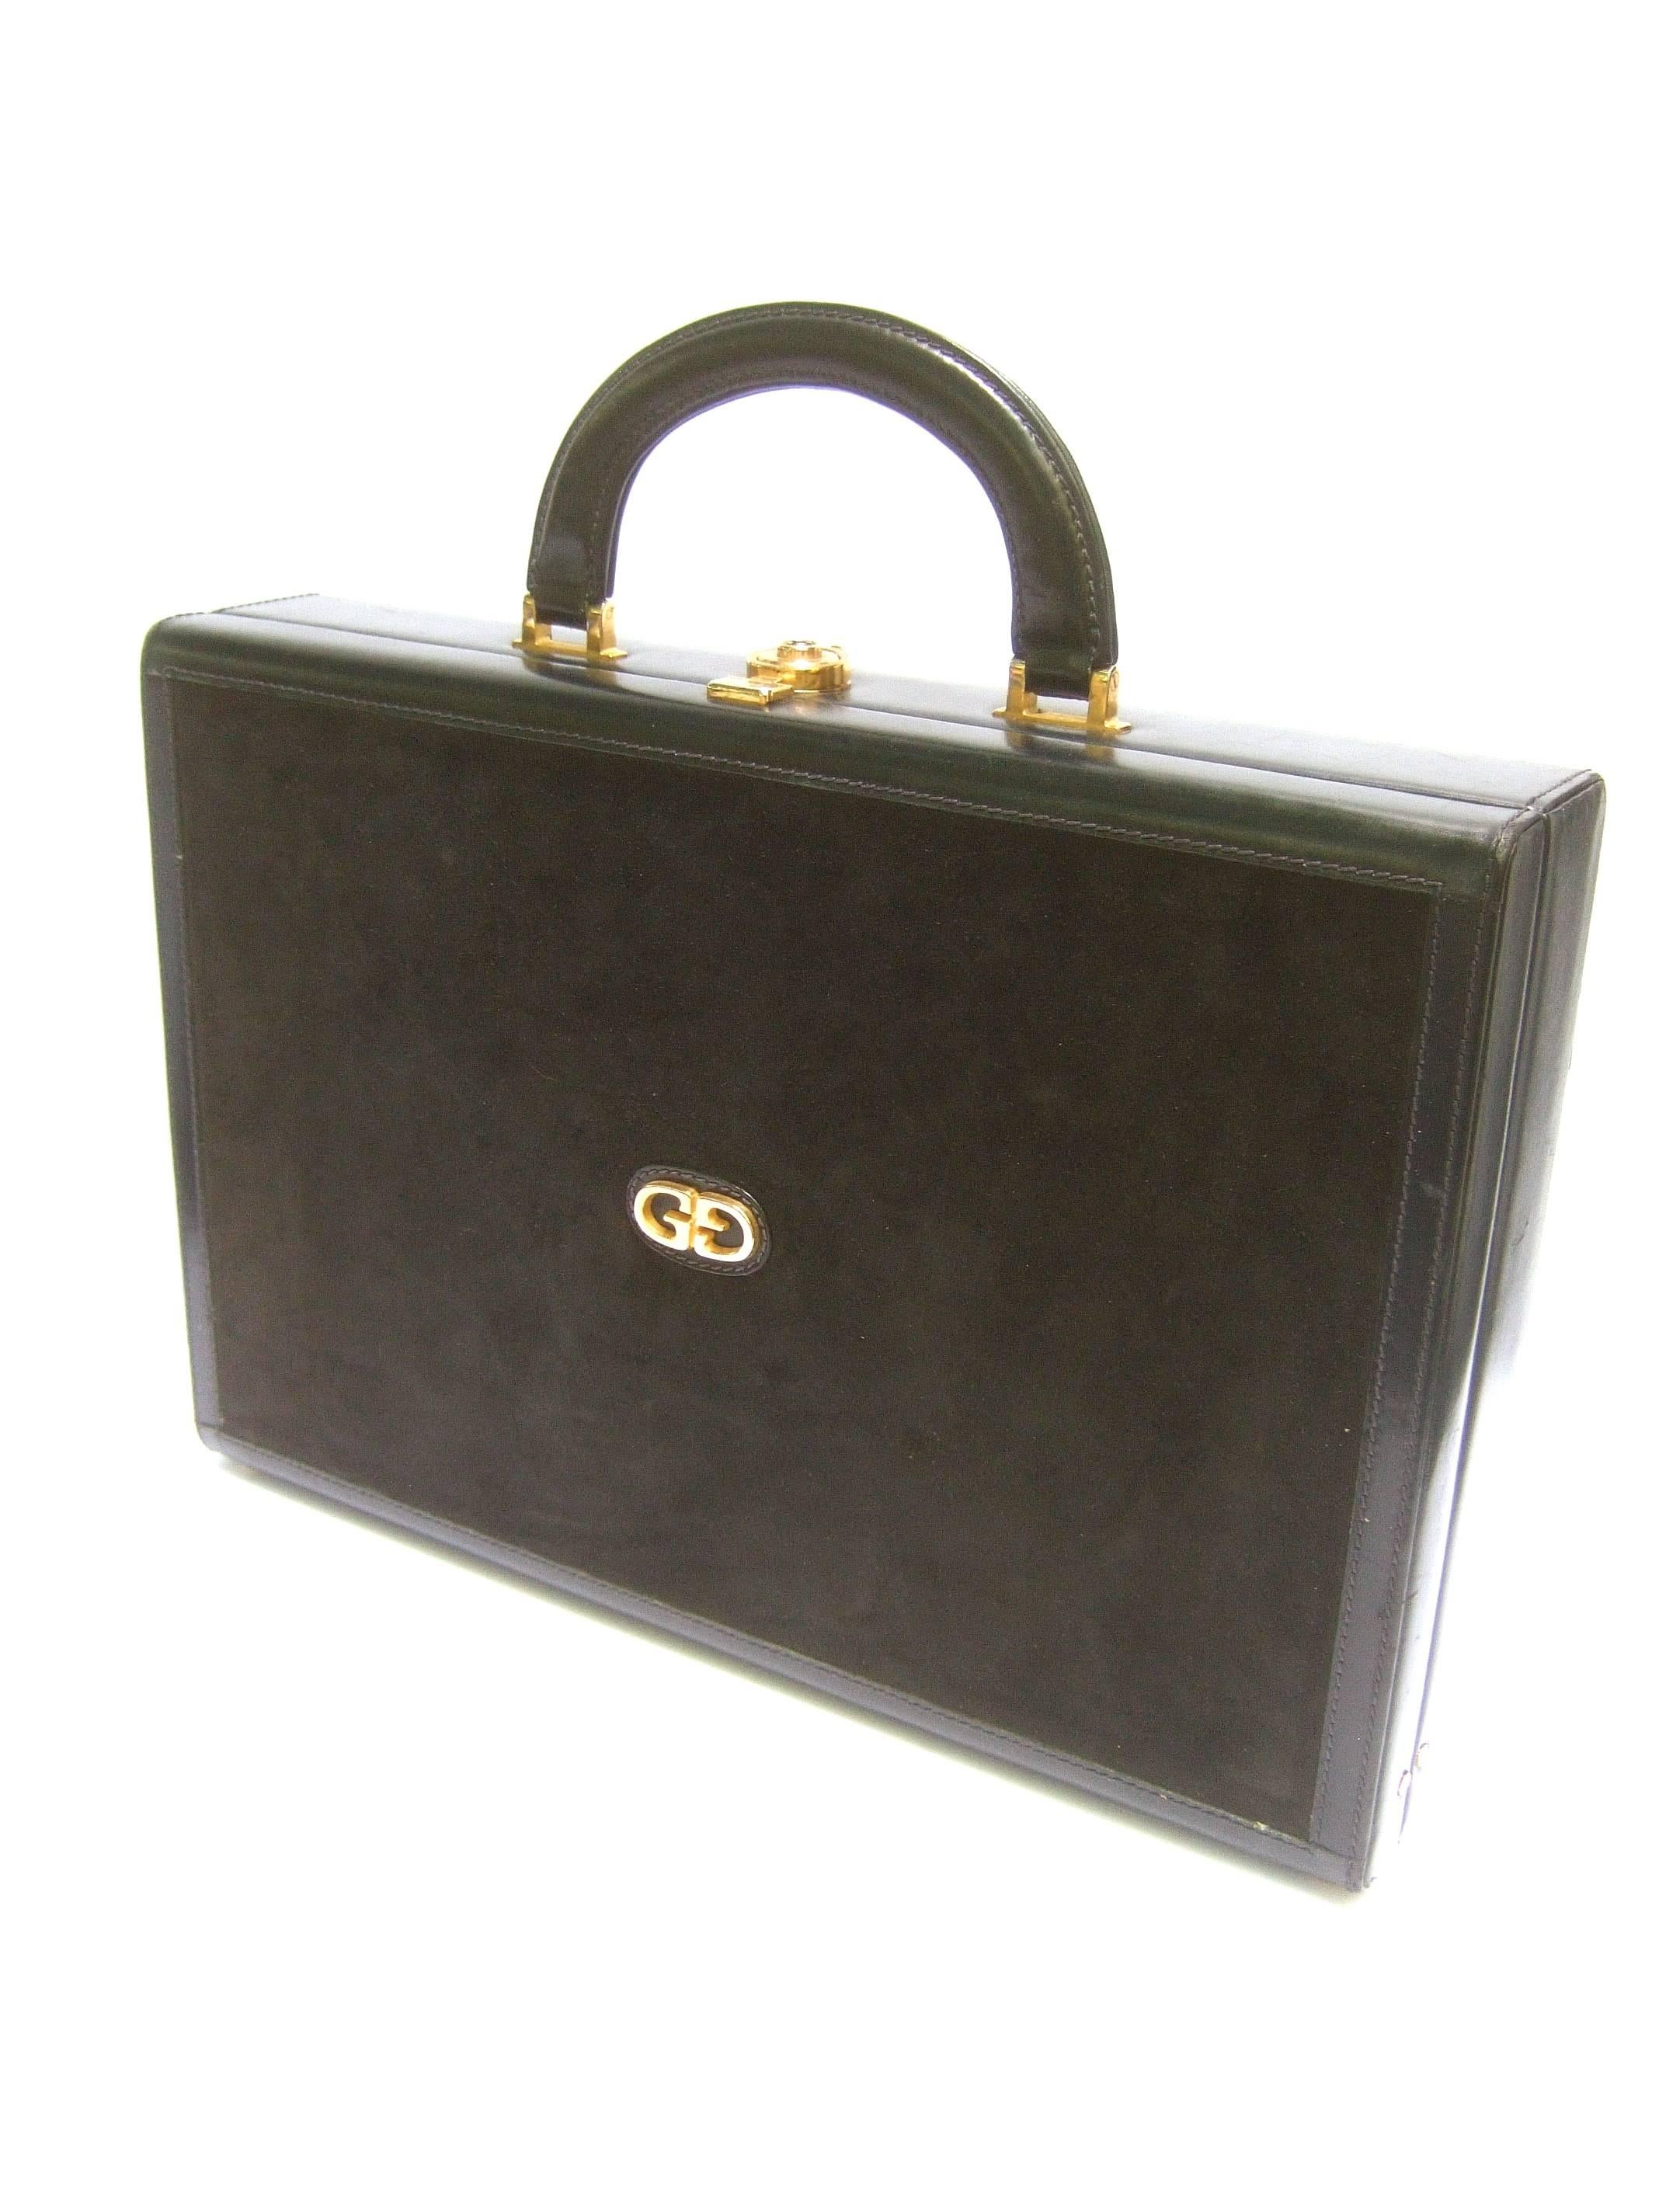 Women's or Men's Gucci Luxurious Black Suede & Leather Briefcase circa 1970s